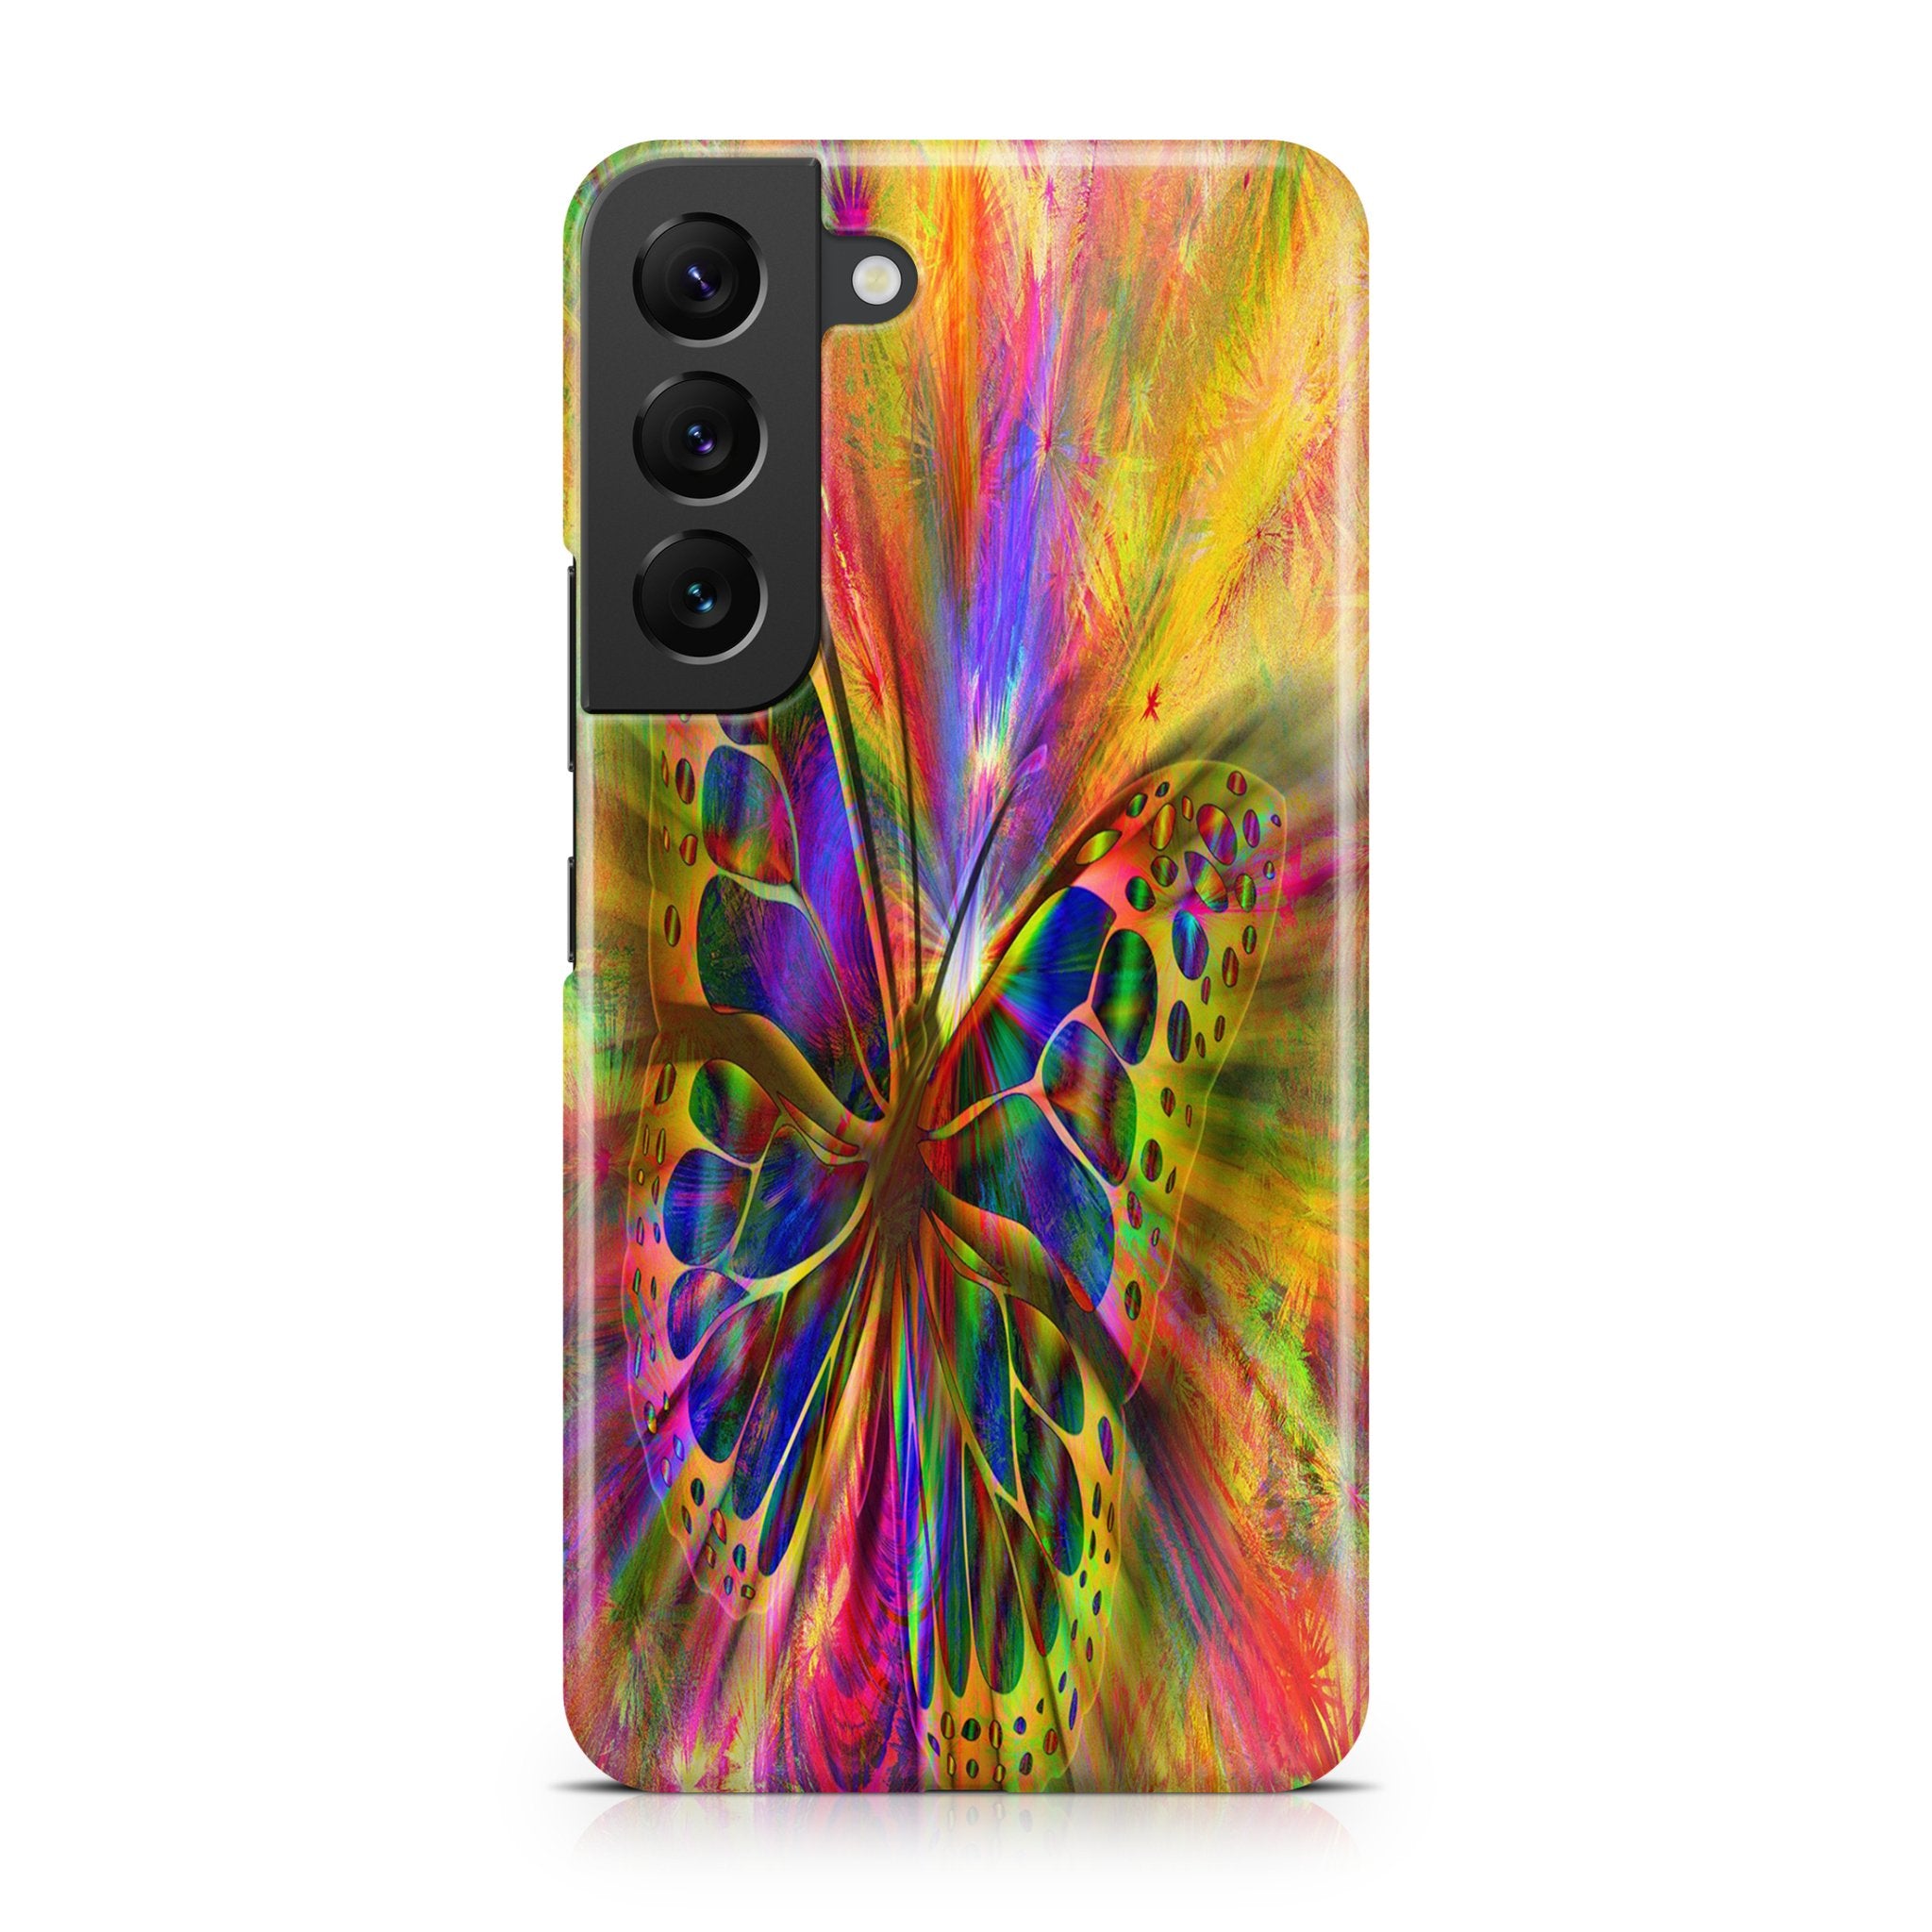 Butterfly - Samsung phone case designs by CaseSwagger